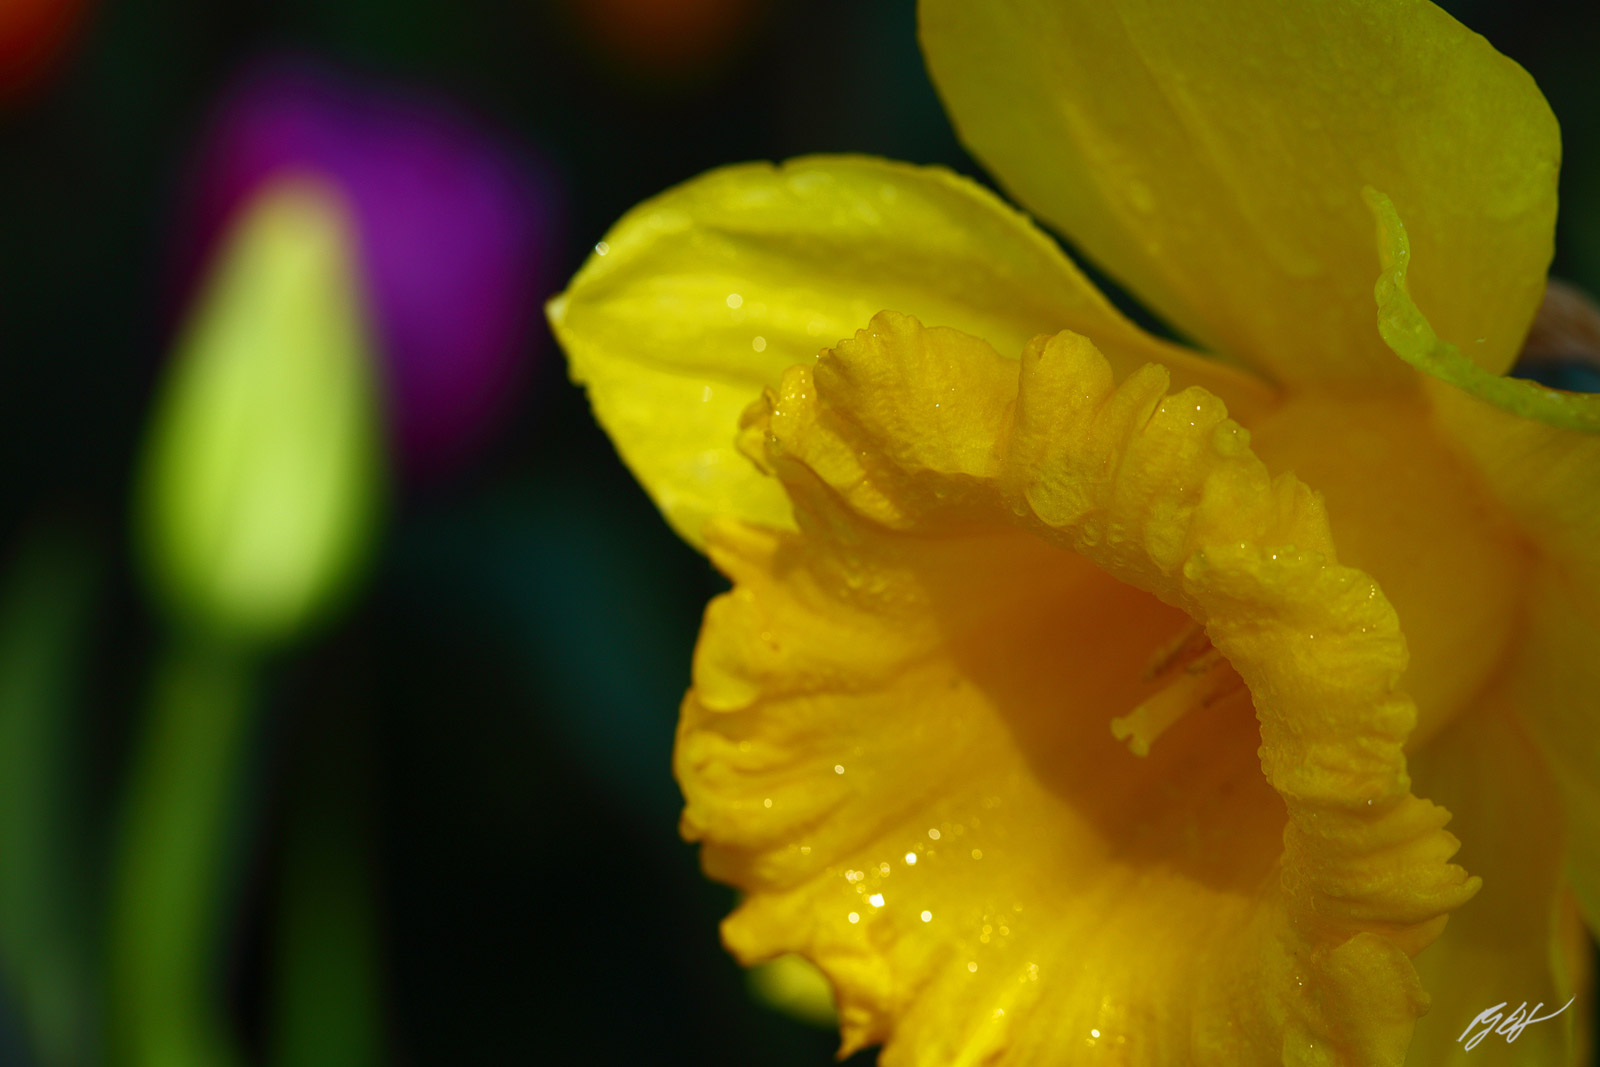 Raindrops on a Daffodil, C/O Roozengaarde from Skagit Valley in Washington